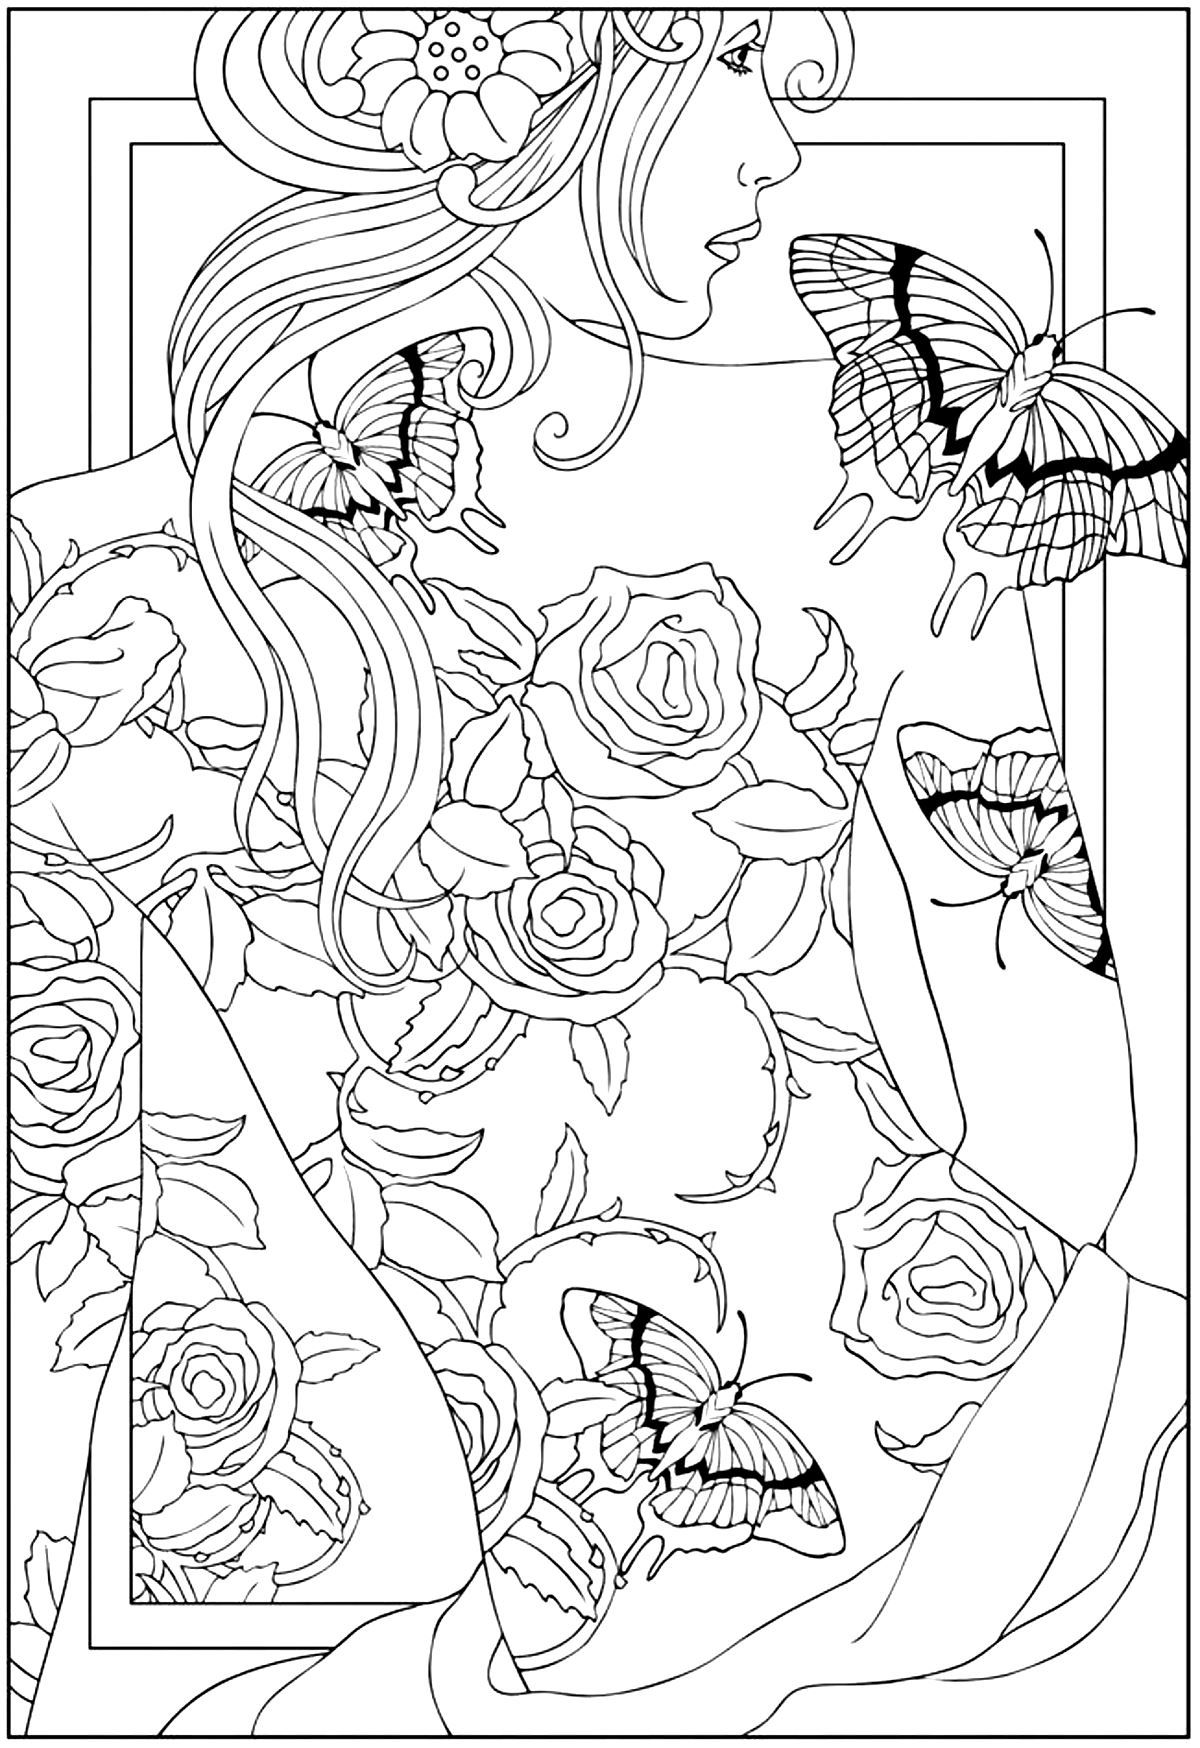 Tattoo - Coloring Pages for adults